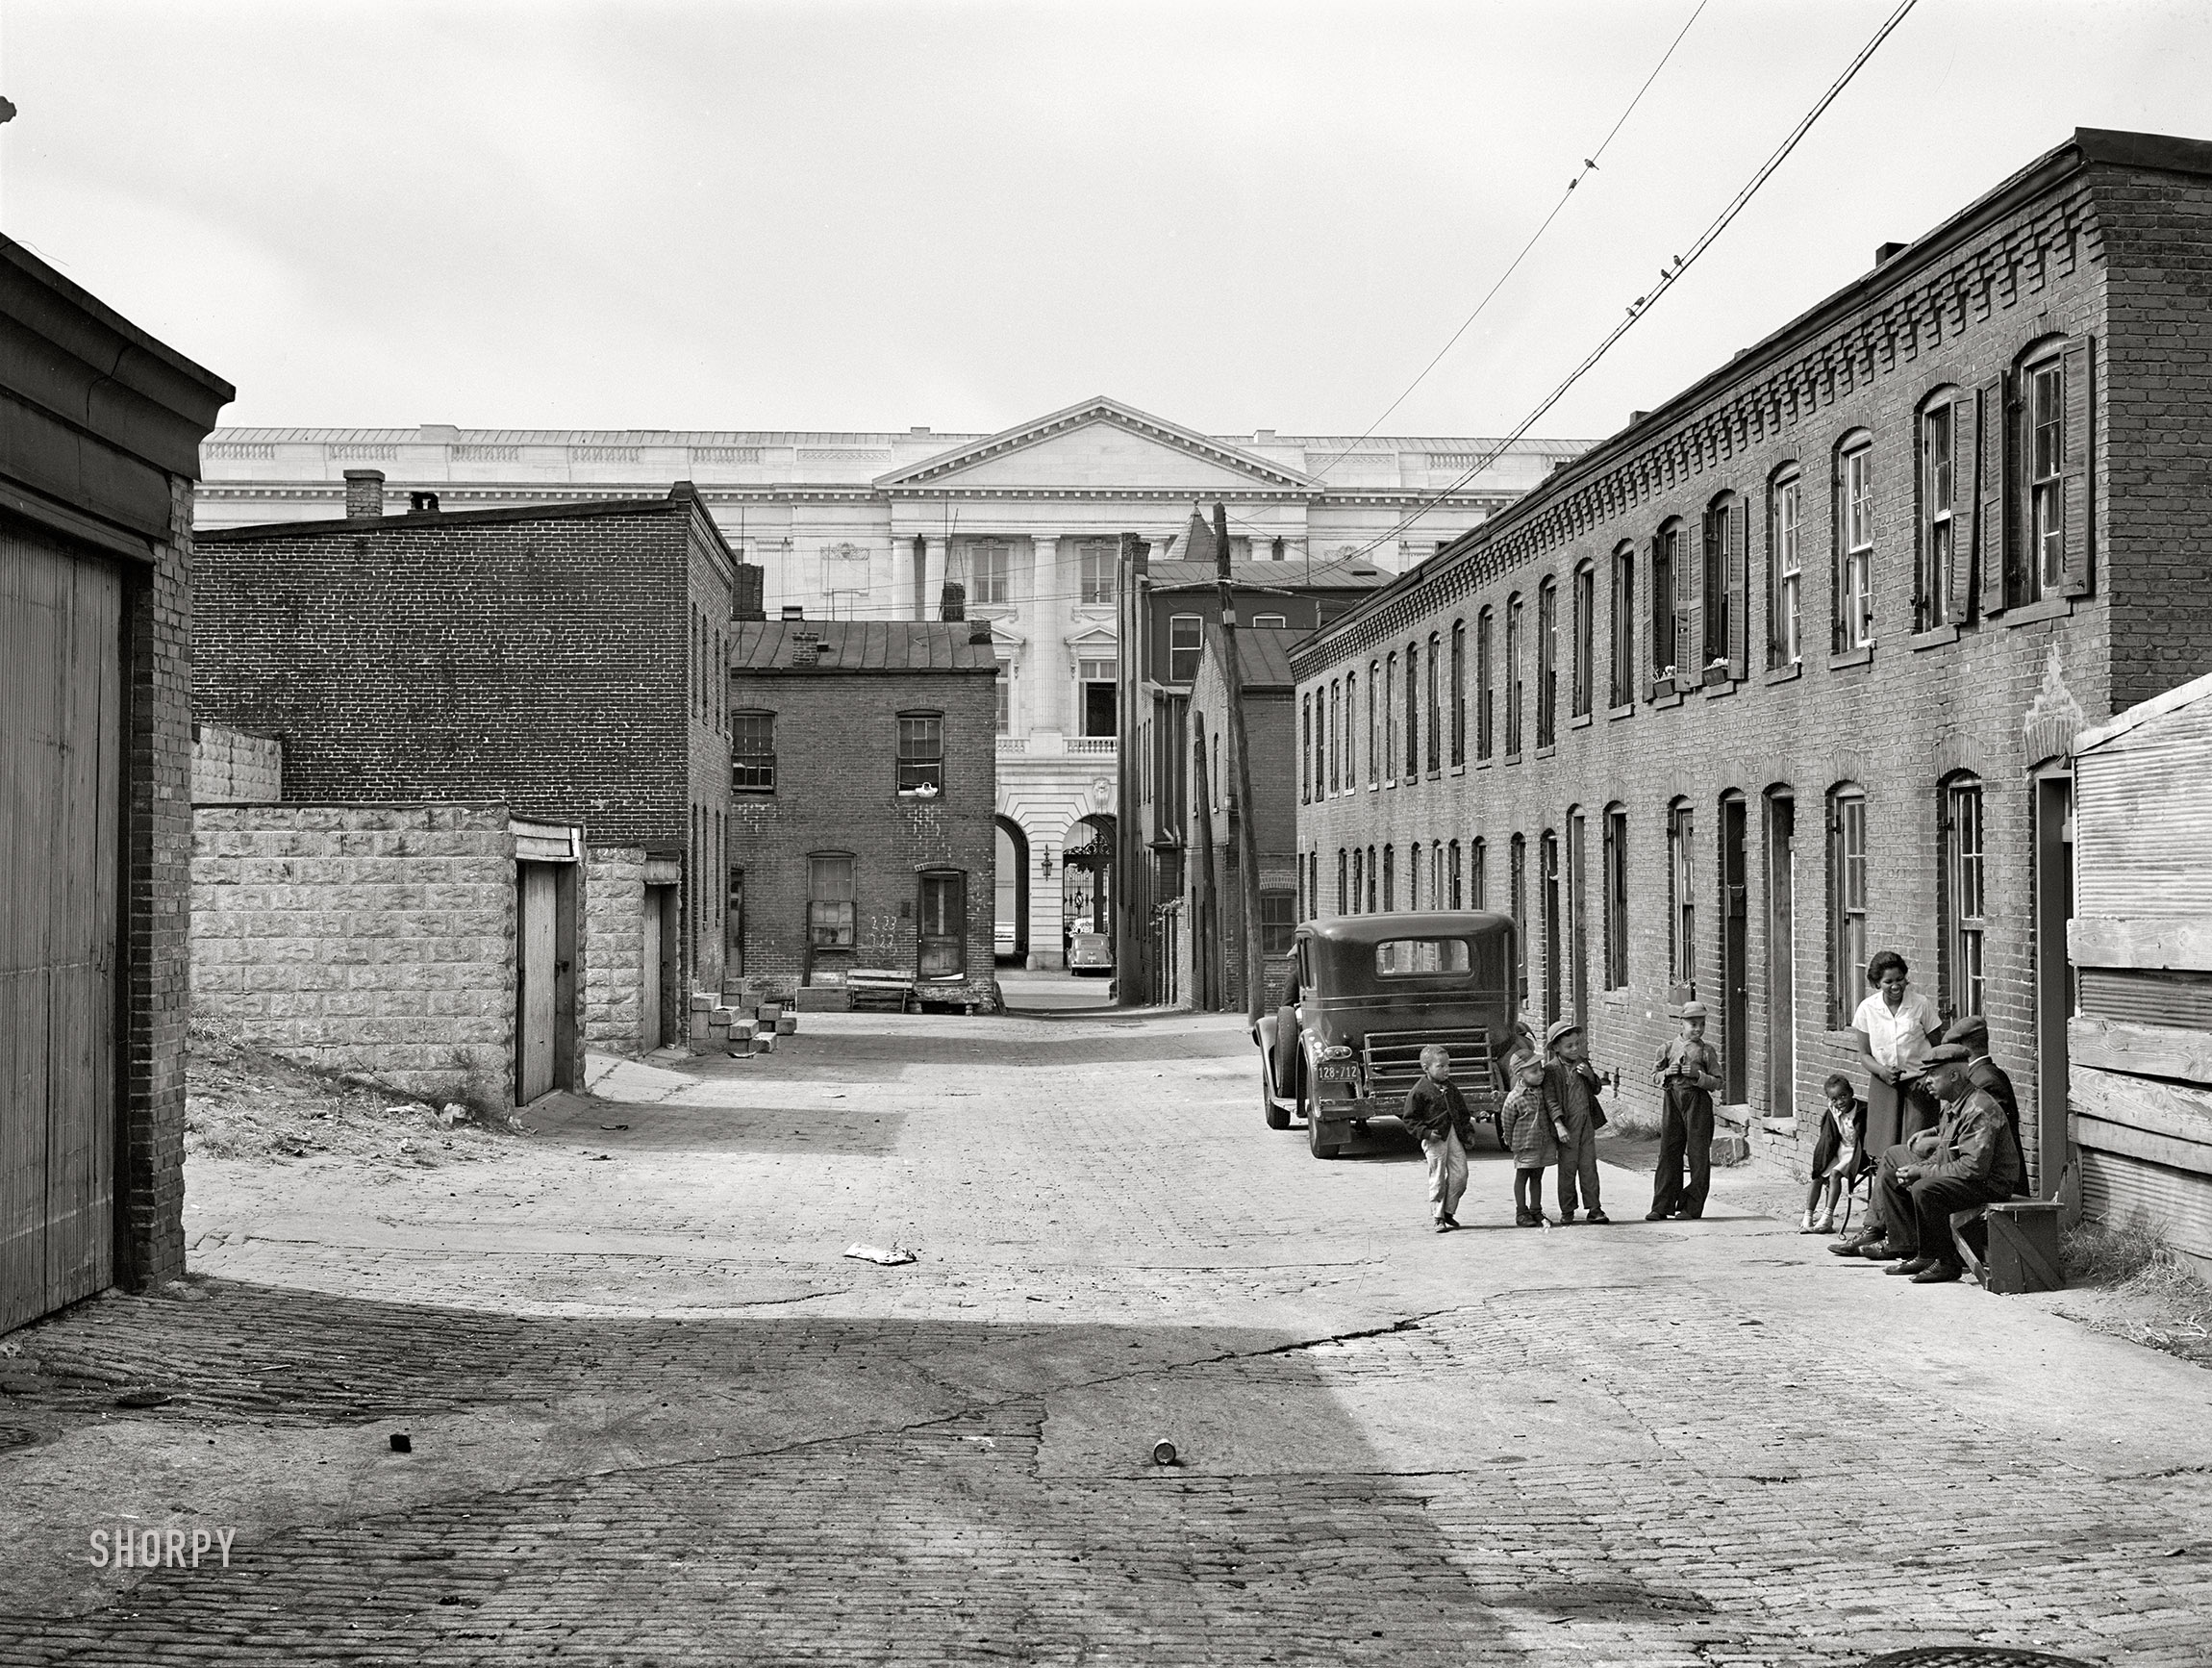 October 1941. "Schoot's Court [i.e., Schott’s Alley], Washington, D.C.; Senate Office Building is in the background. Four very small dark rooms rent for 15 and 18 dollars per month with water and privy in yard. It used to rent for 6 and 8 dollars. Frank Coles and his friend are sitting on the bench. He was a cement plasterer but has been on relief during the past year. He has frequent heart attacks and his feet and ankles are all swollen. Doctor advises a chicken and lamb diet, no pork or beef, but he doesn't even have money to buy fuel. He can't get waited on in a clinic or get to one. He waited from before 11 until 4 p.m. but still could not see a doctor. He has been in Washington since 1906." Photo by Marion Post Wolcott. View full size.